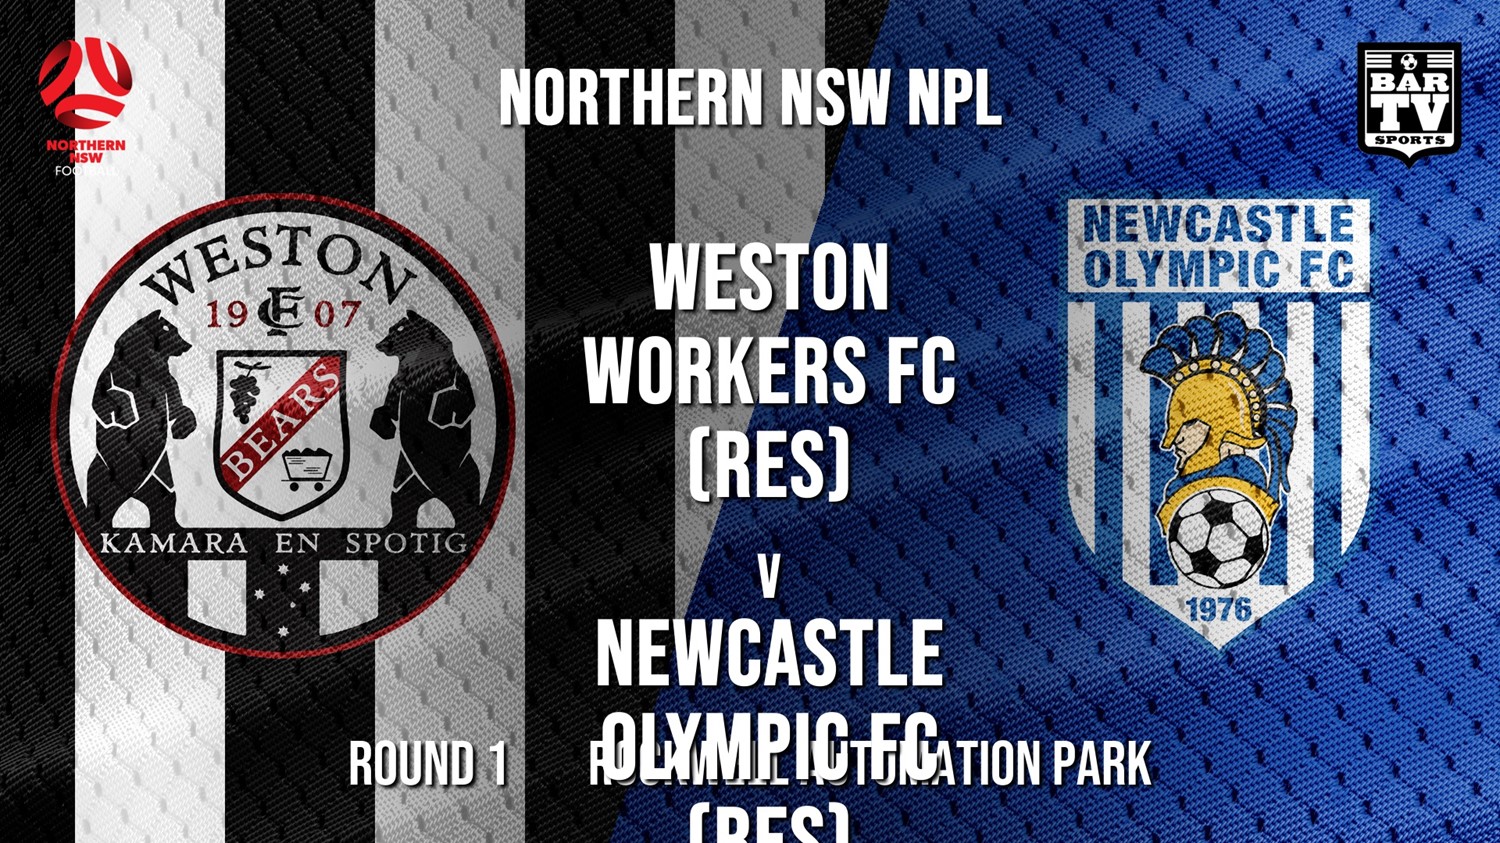 NPL - Northern NSW Reserves Round 1 - Weston Workers FC (Res) v Newcastle Olympic FC (Res) Minigame Slate Image